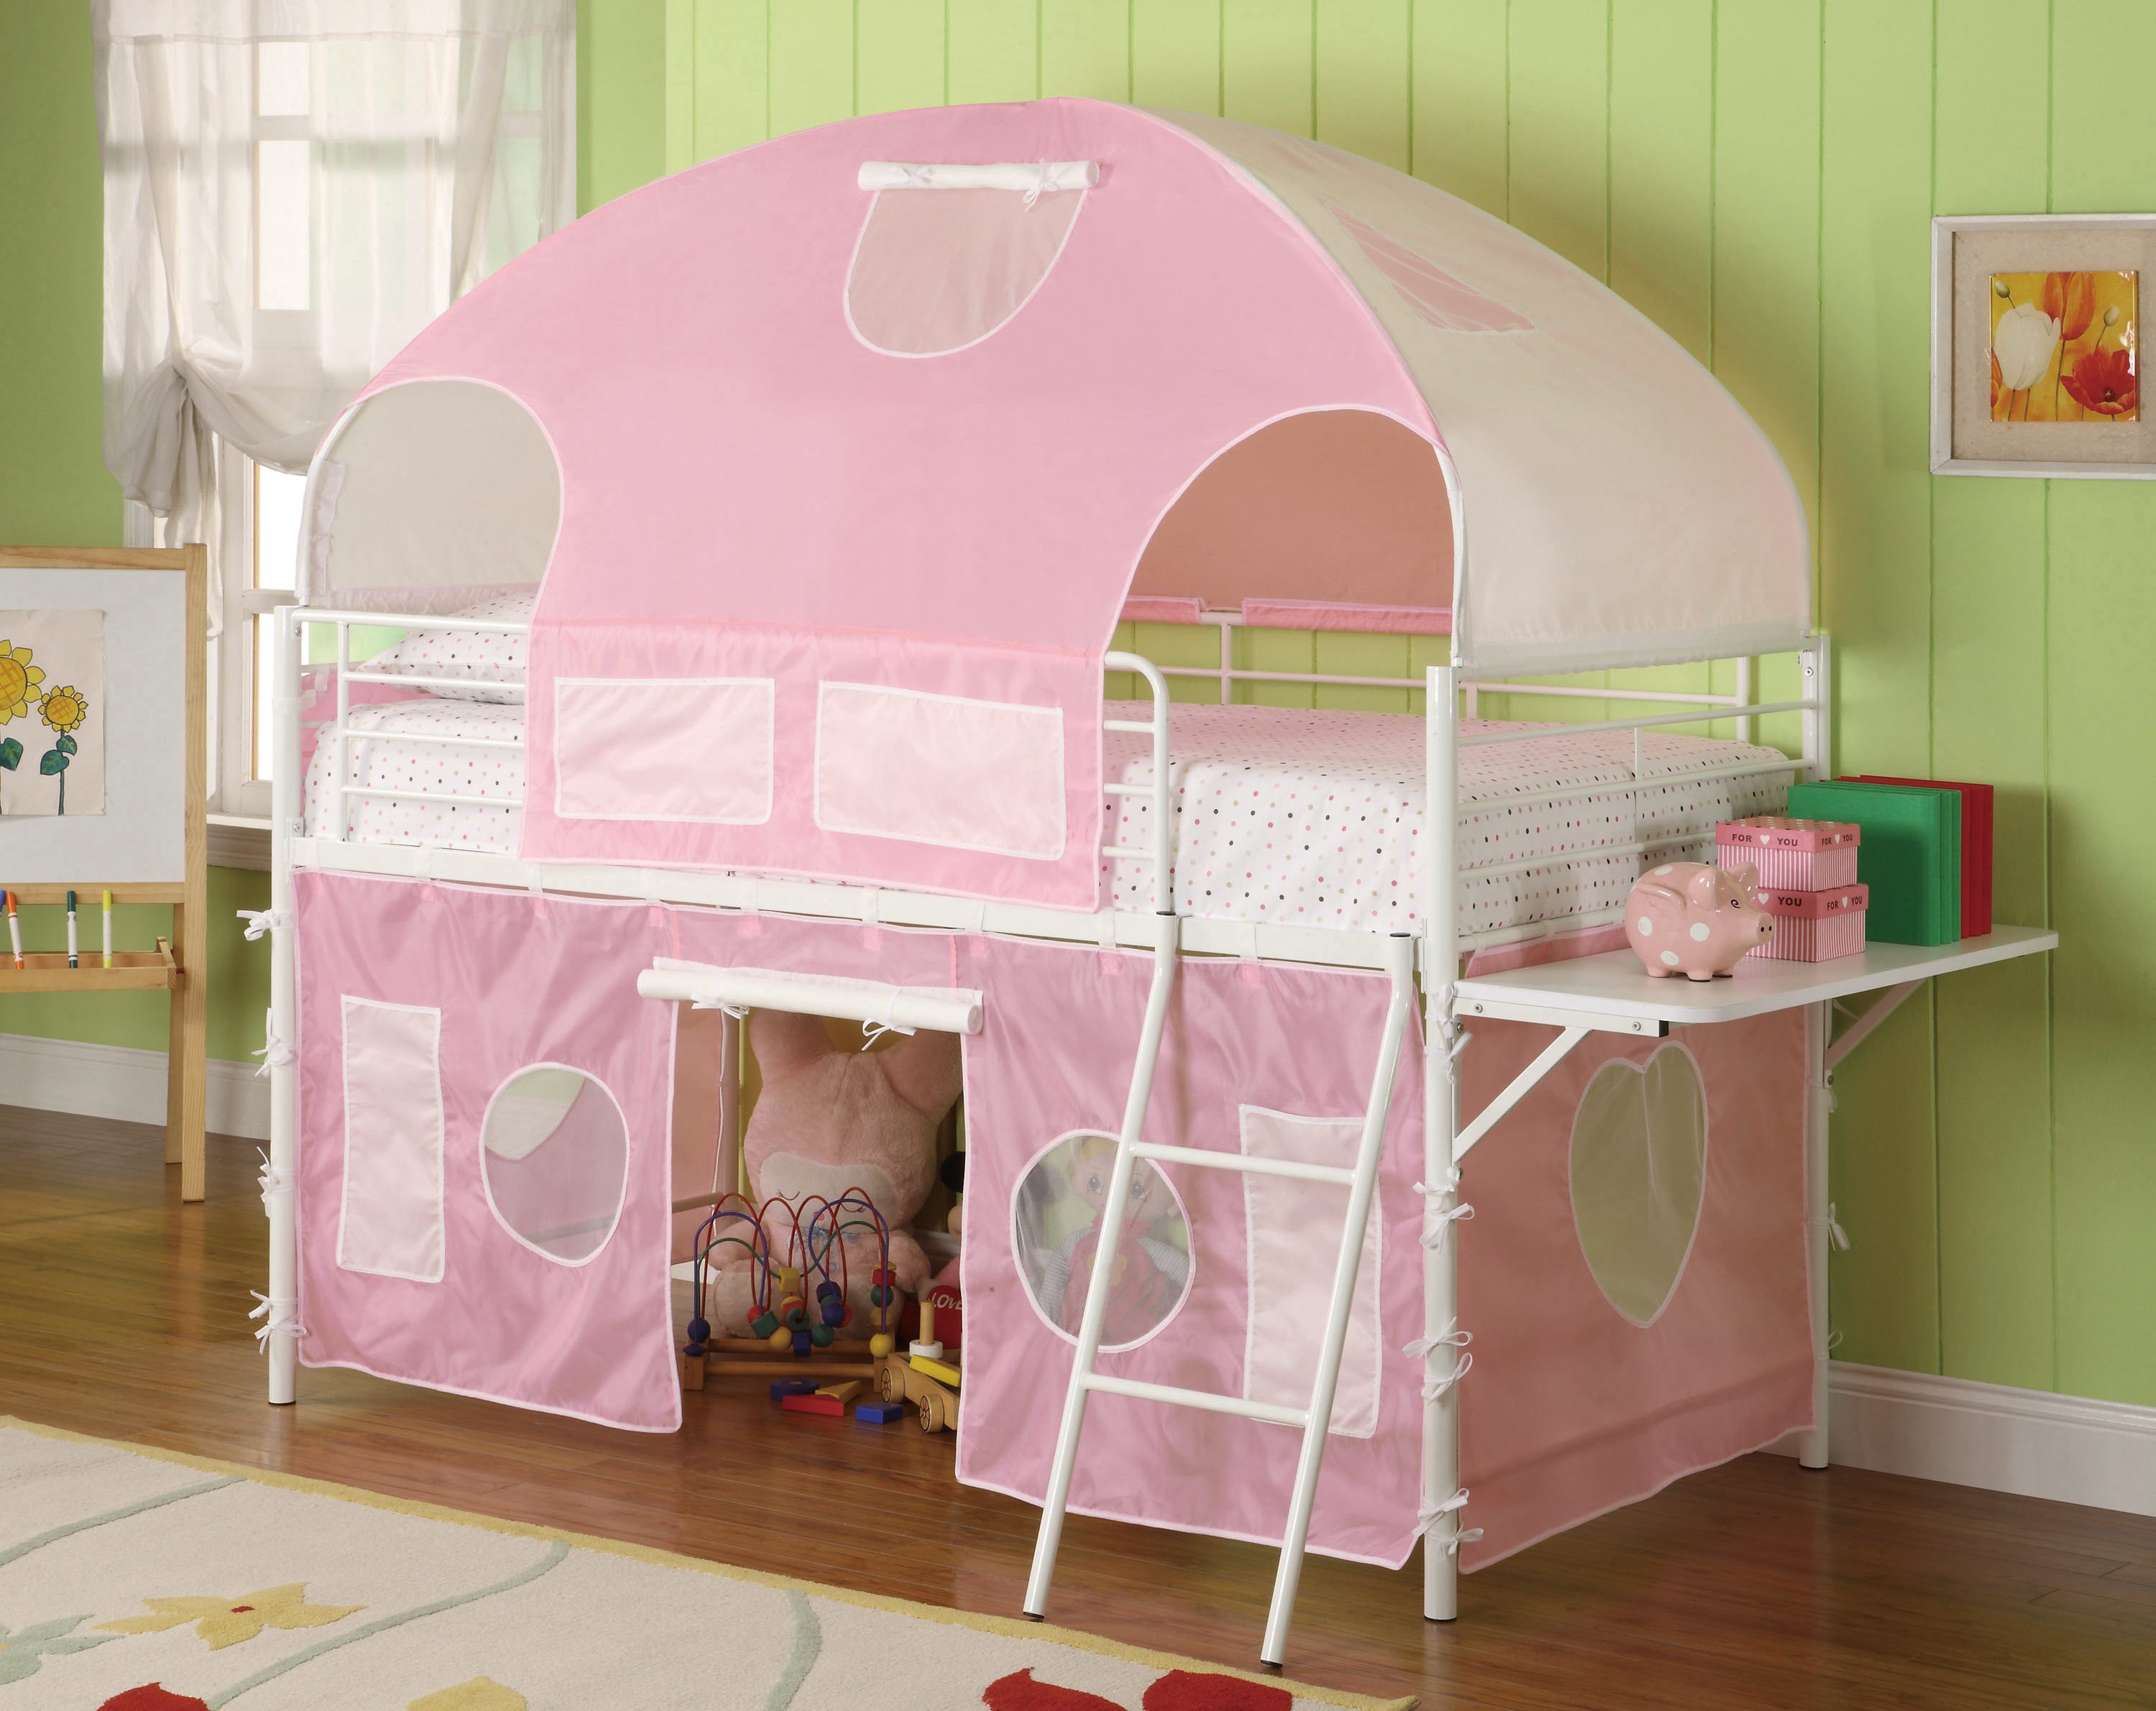 Sweetheart Tent Loft Bed Pink and White - image 1 of 4